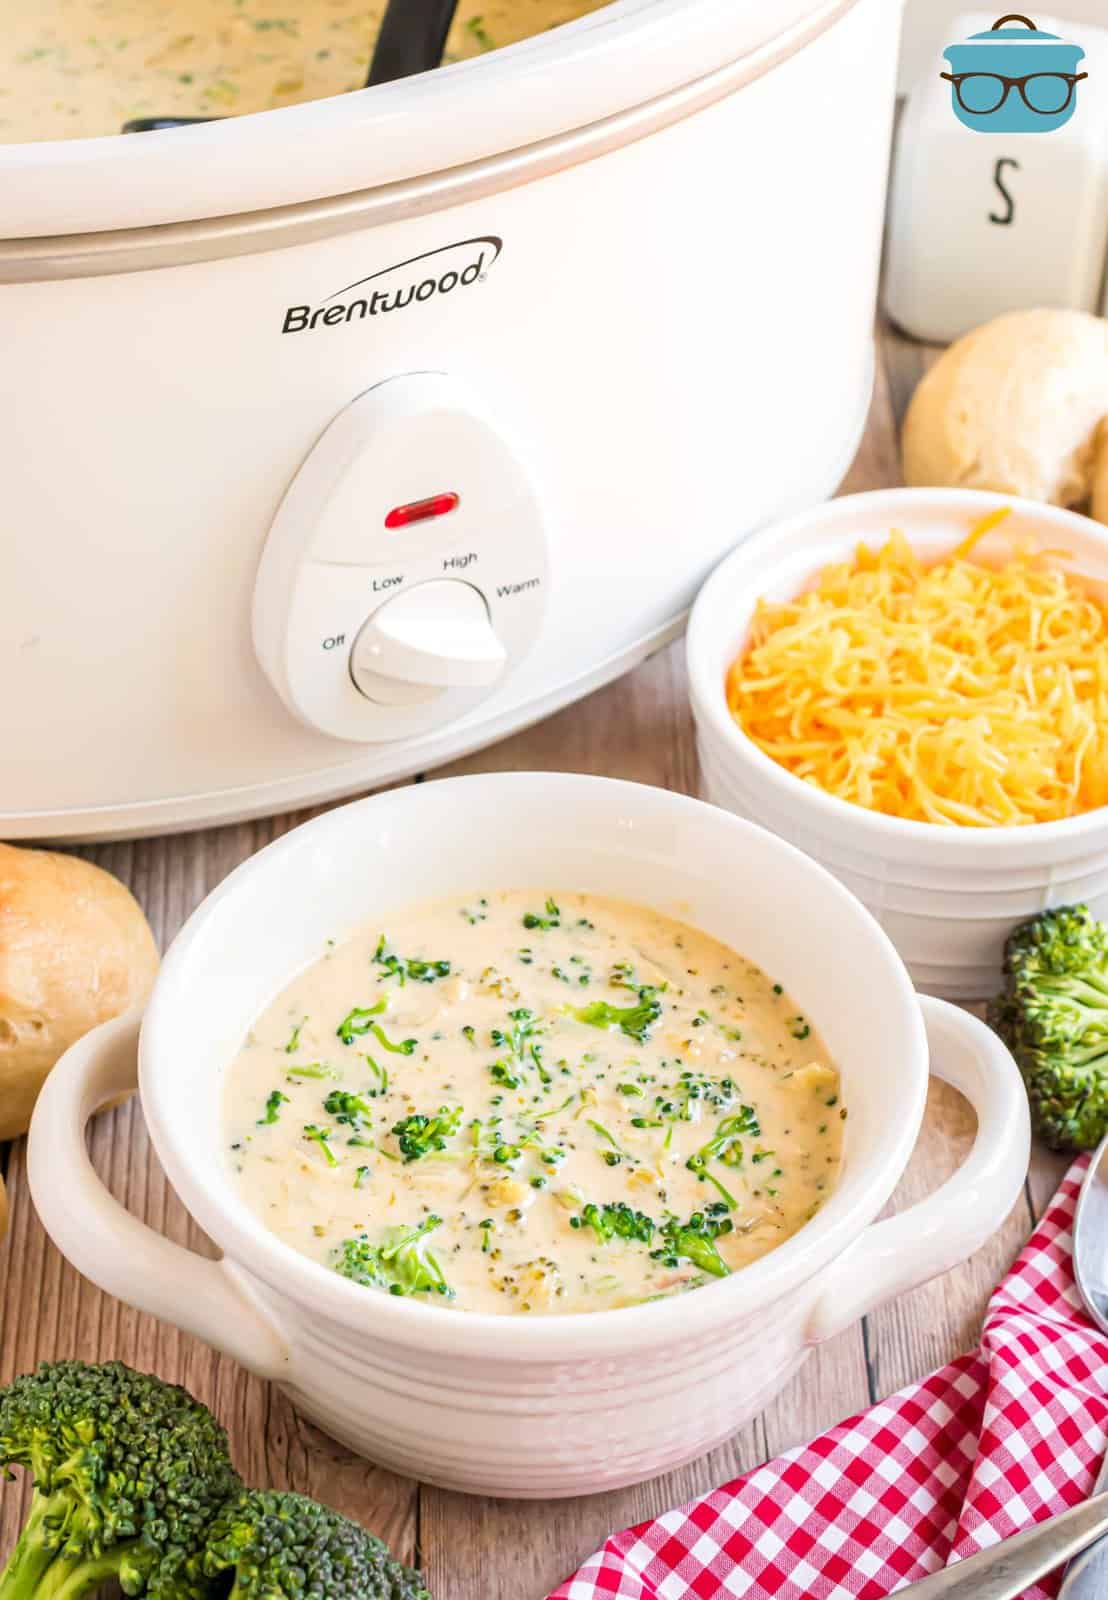 A bowl of broccoli cheddar soup sitting in front of a Crock pot.